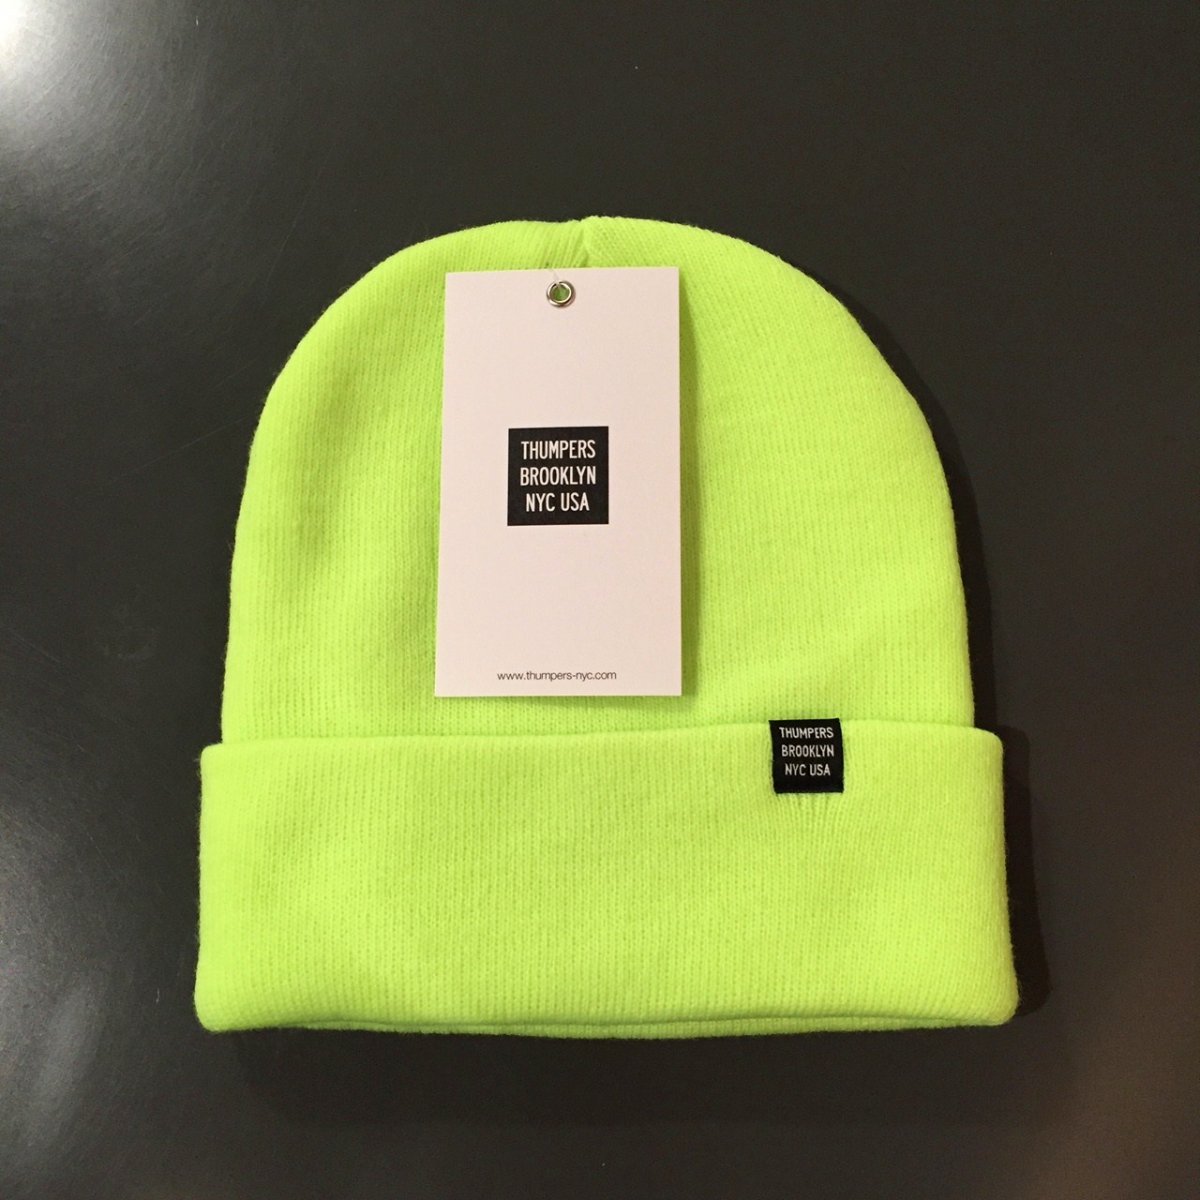 THUMPERS NYC サンパーズ / ニットキャップ BASIC BEANIE 通販 - HOUSE